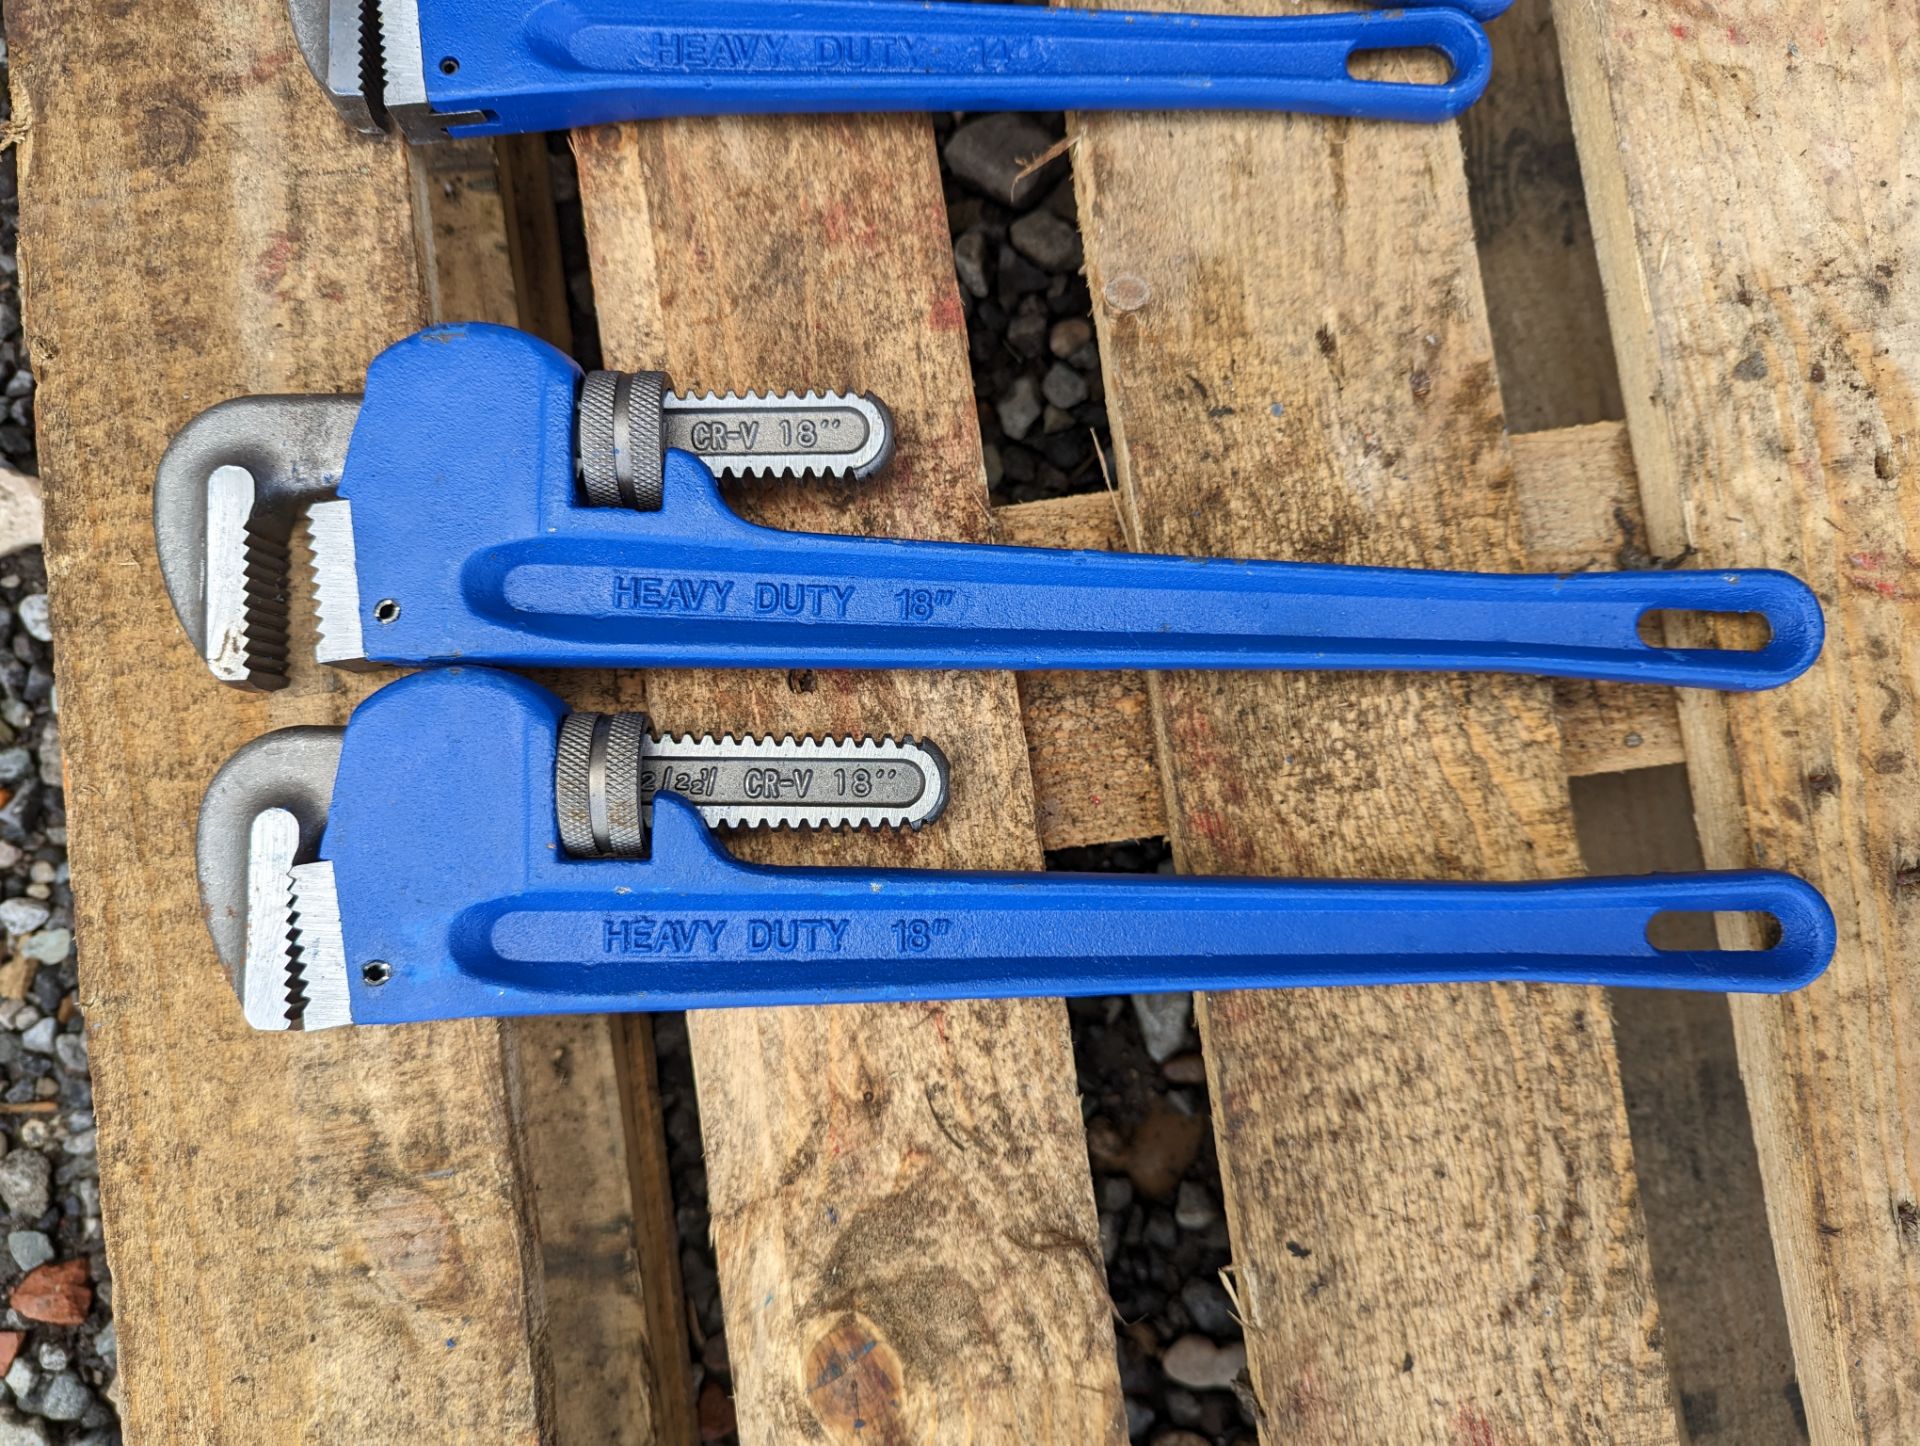 3x Pipe Wrenches